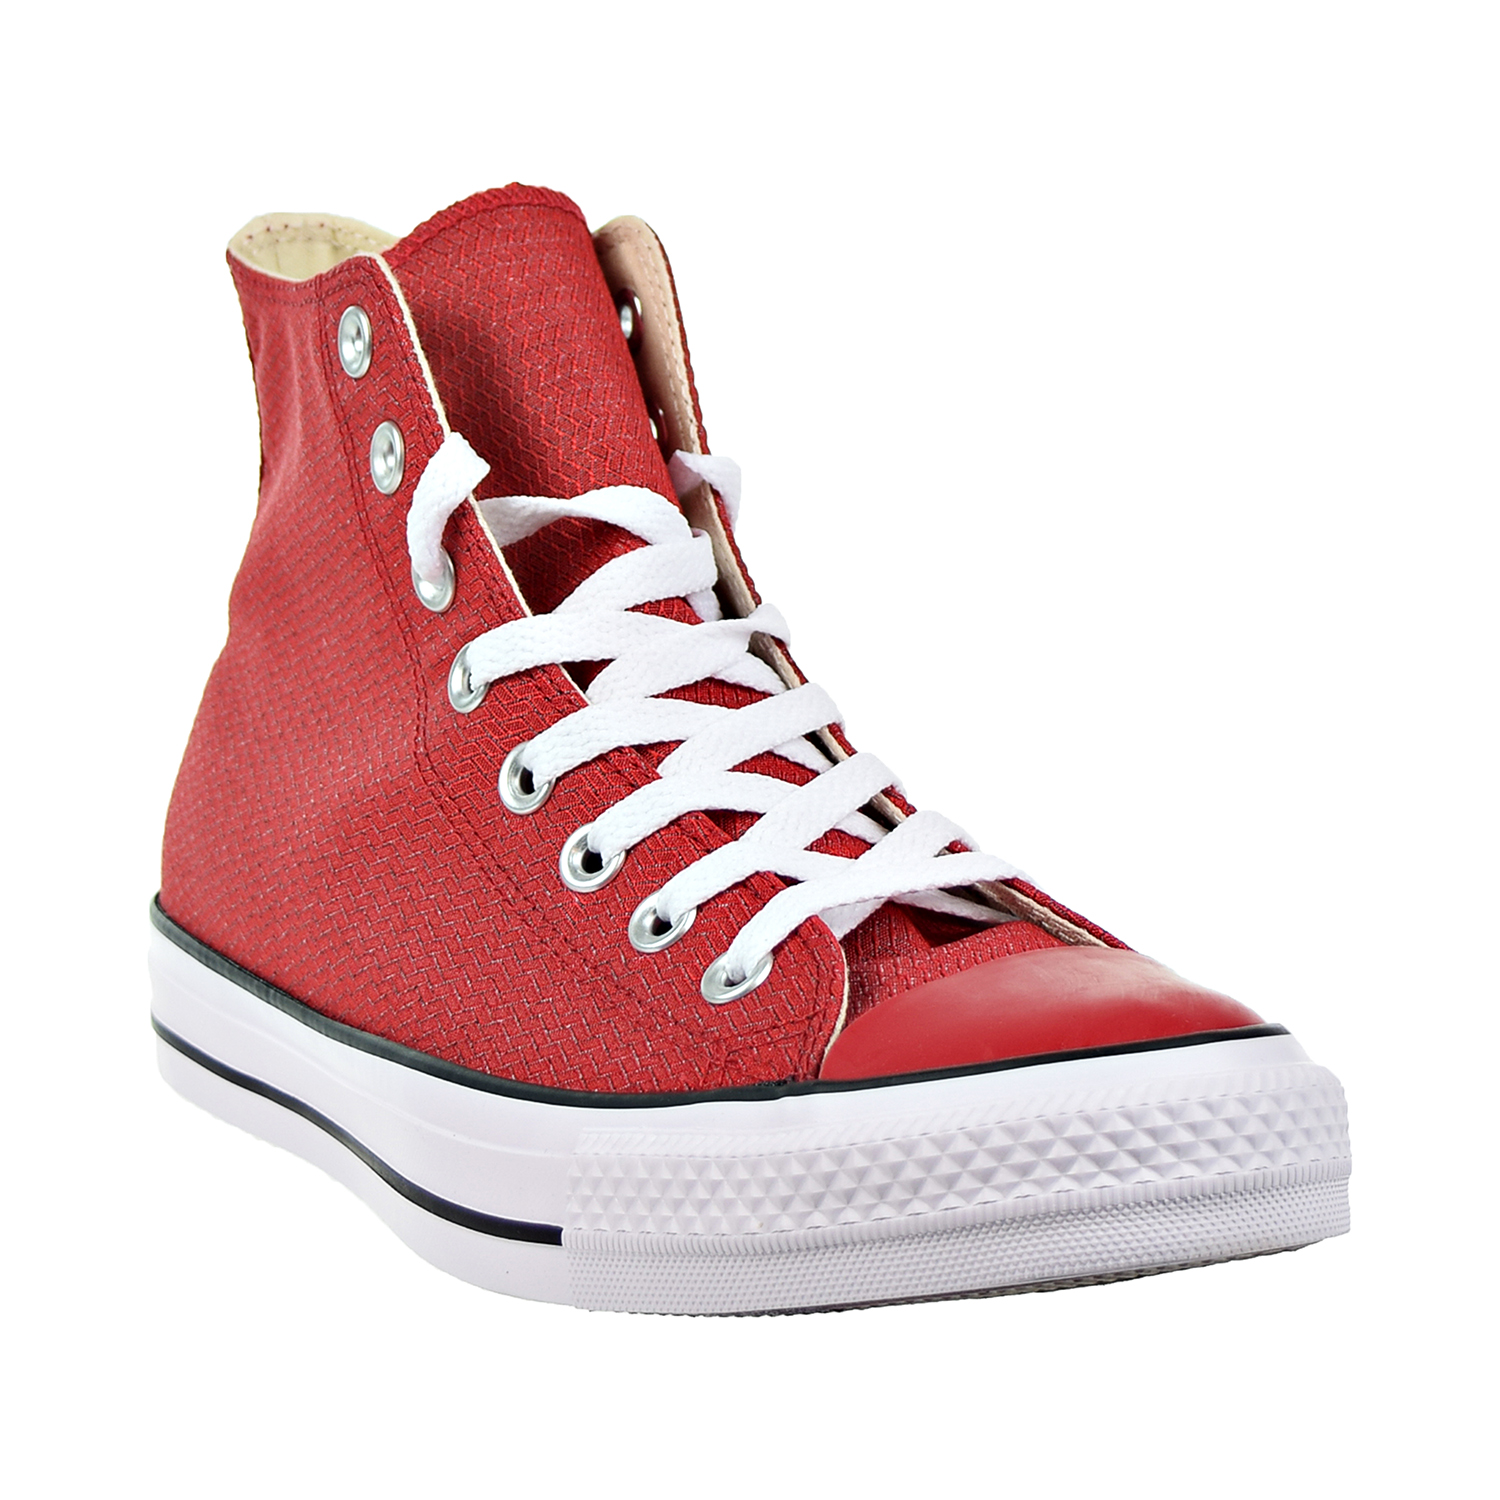 Enumerate Plow Hub Converse Chuck Taylor All Star High Top Mens Shoes Gym Red/Black/White  160501f